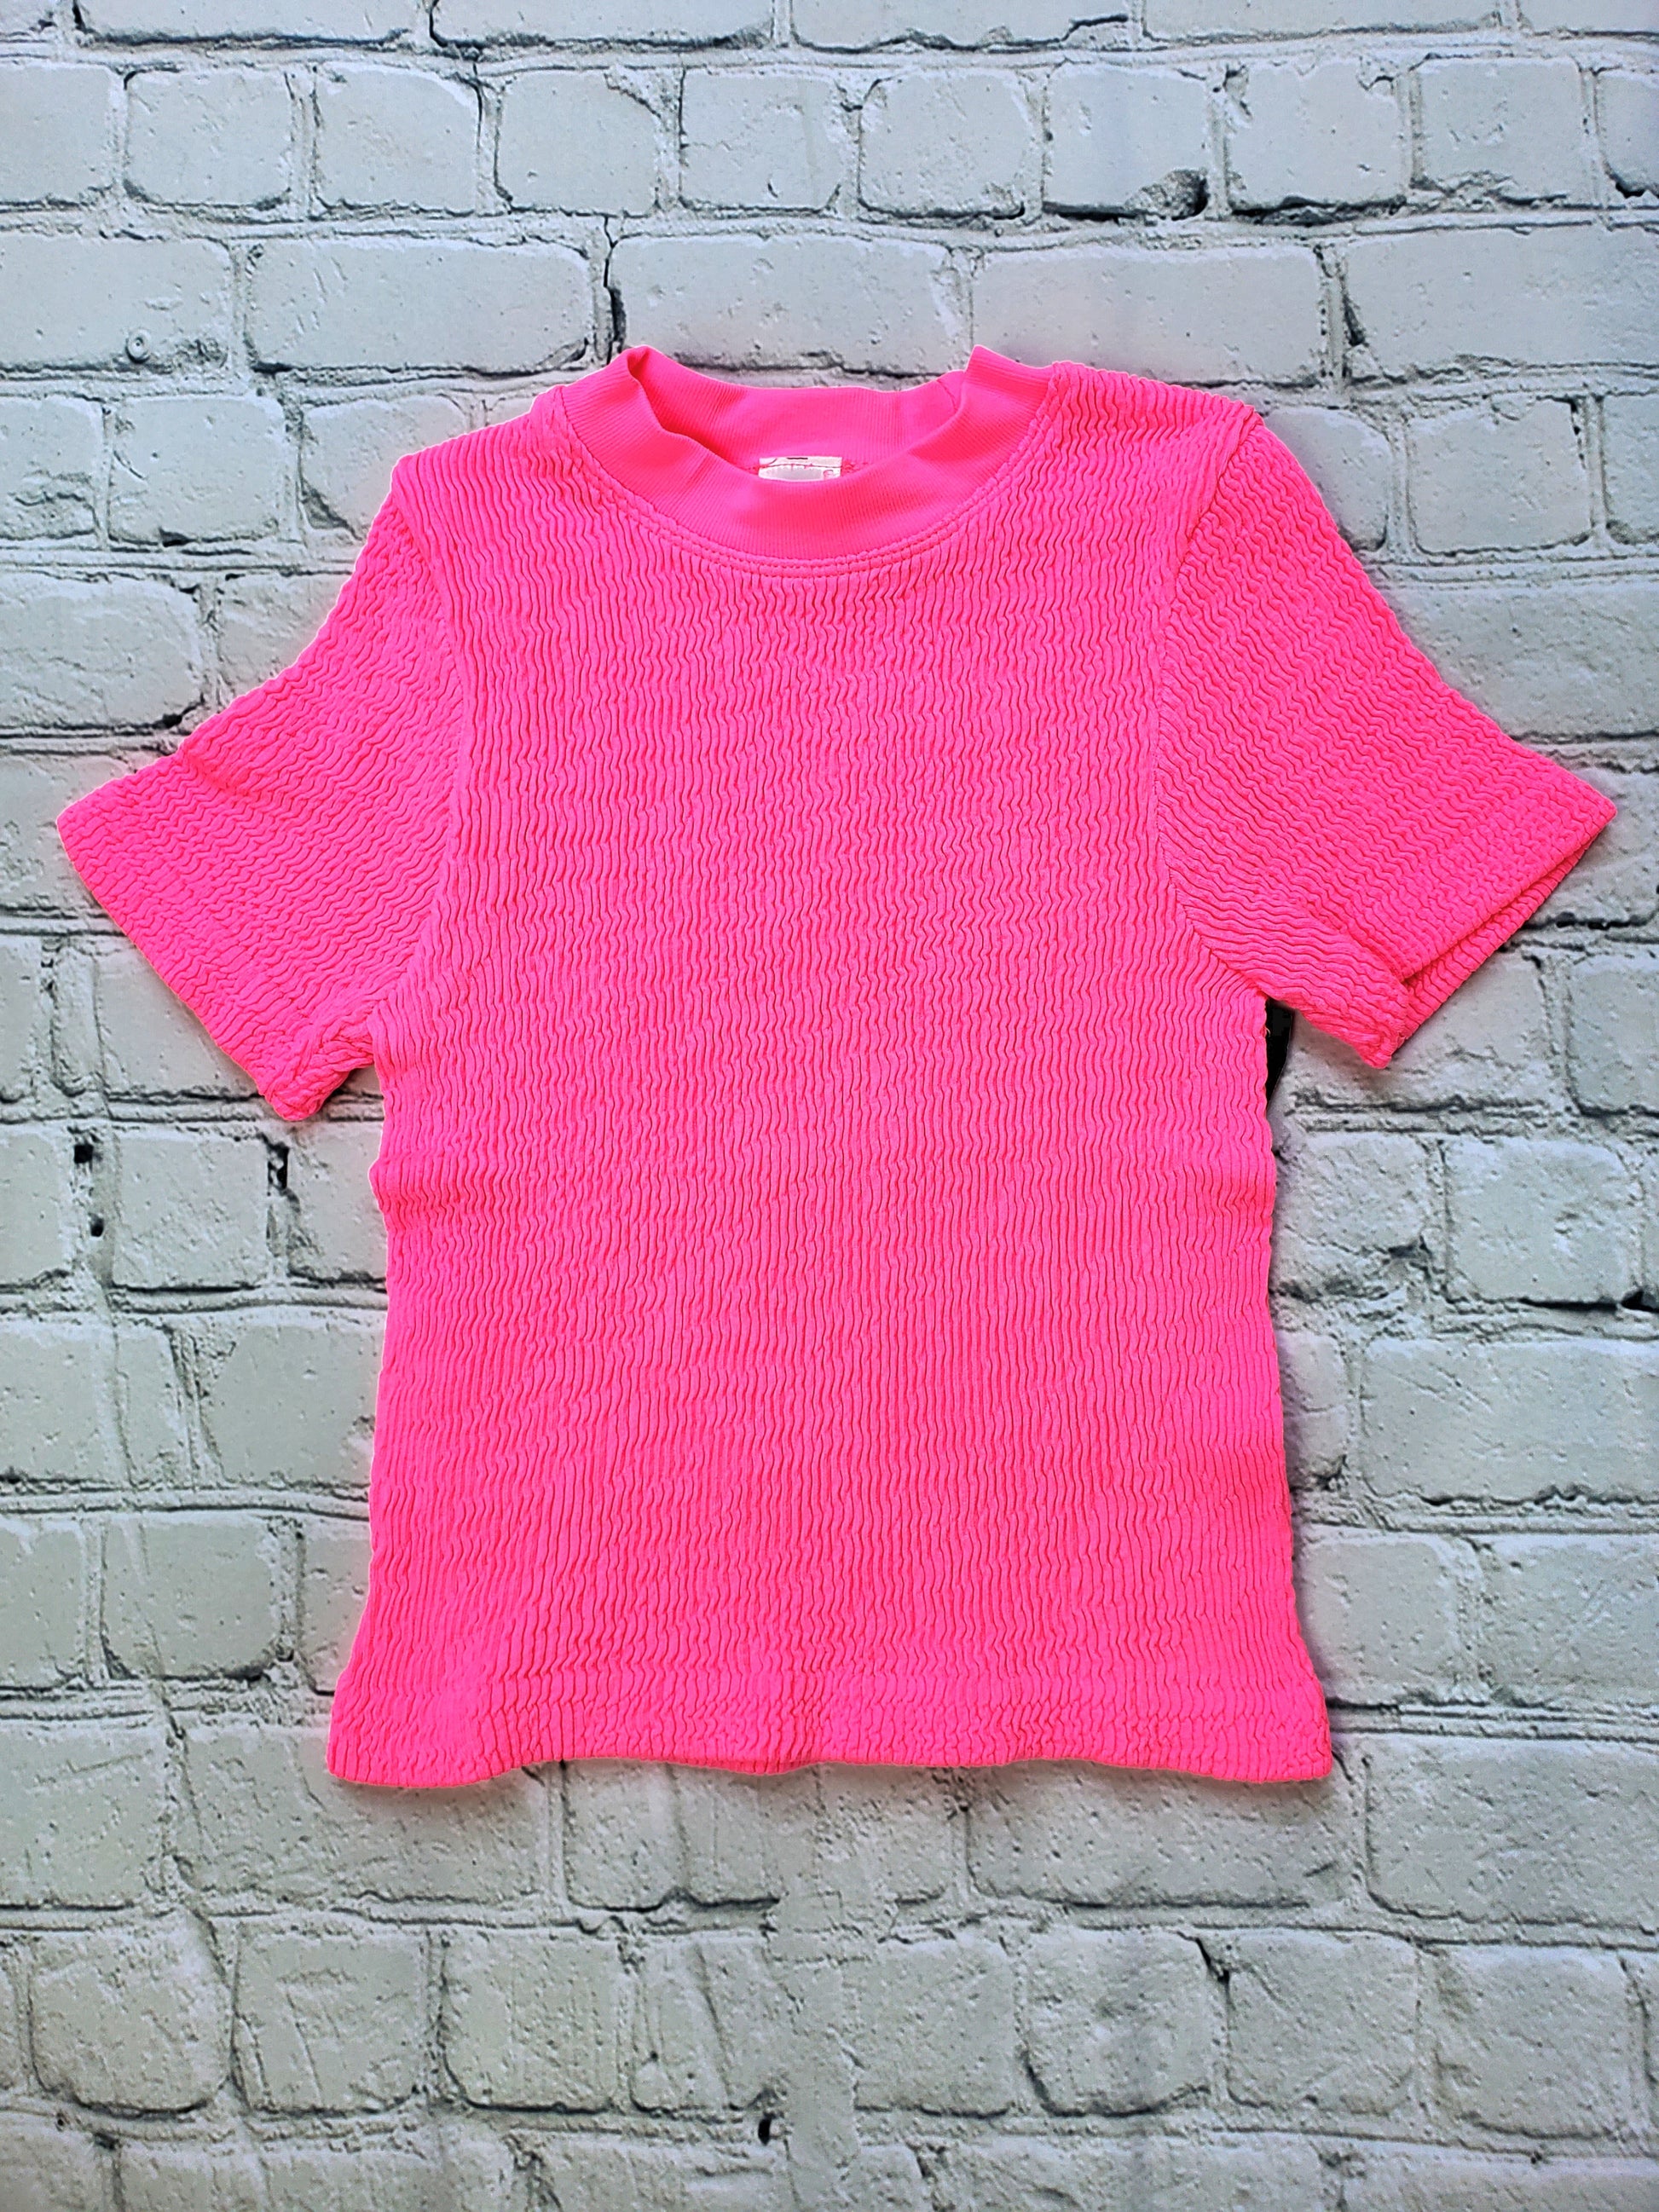 stretchy, smocked, short sleeve top. True highlighter neon pink. Full length top